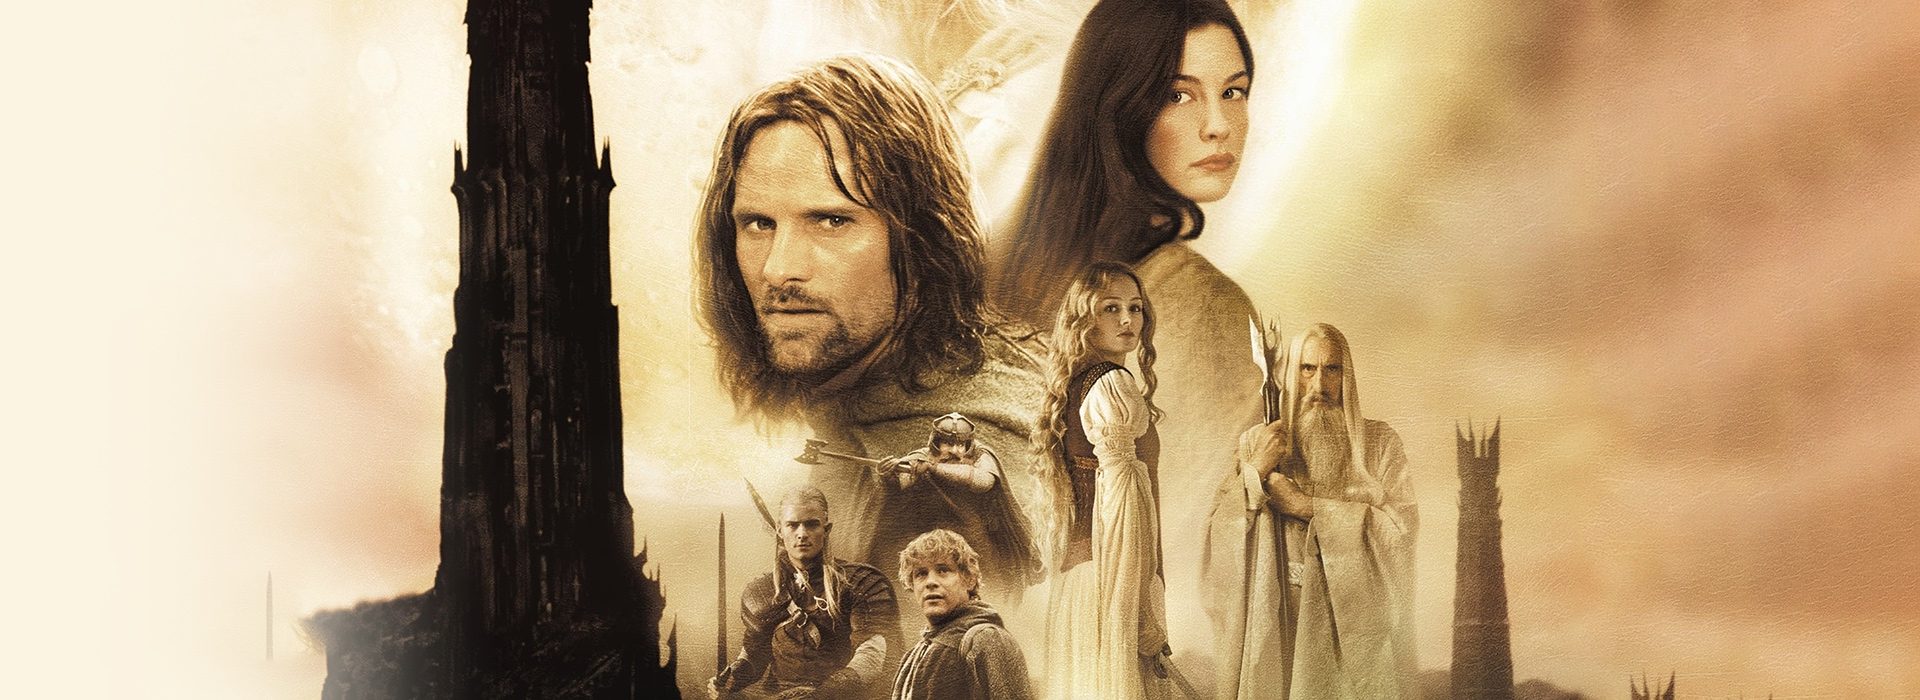 Movie poster Lord of the Rings: The Two Towers